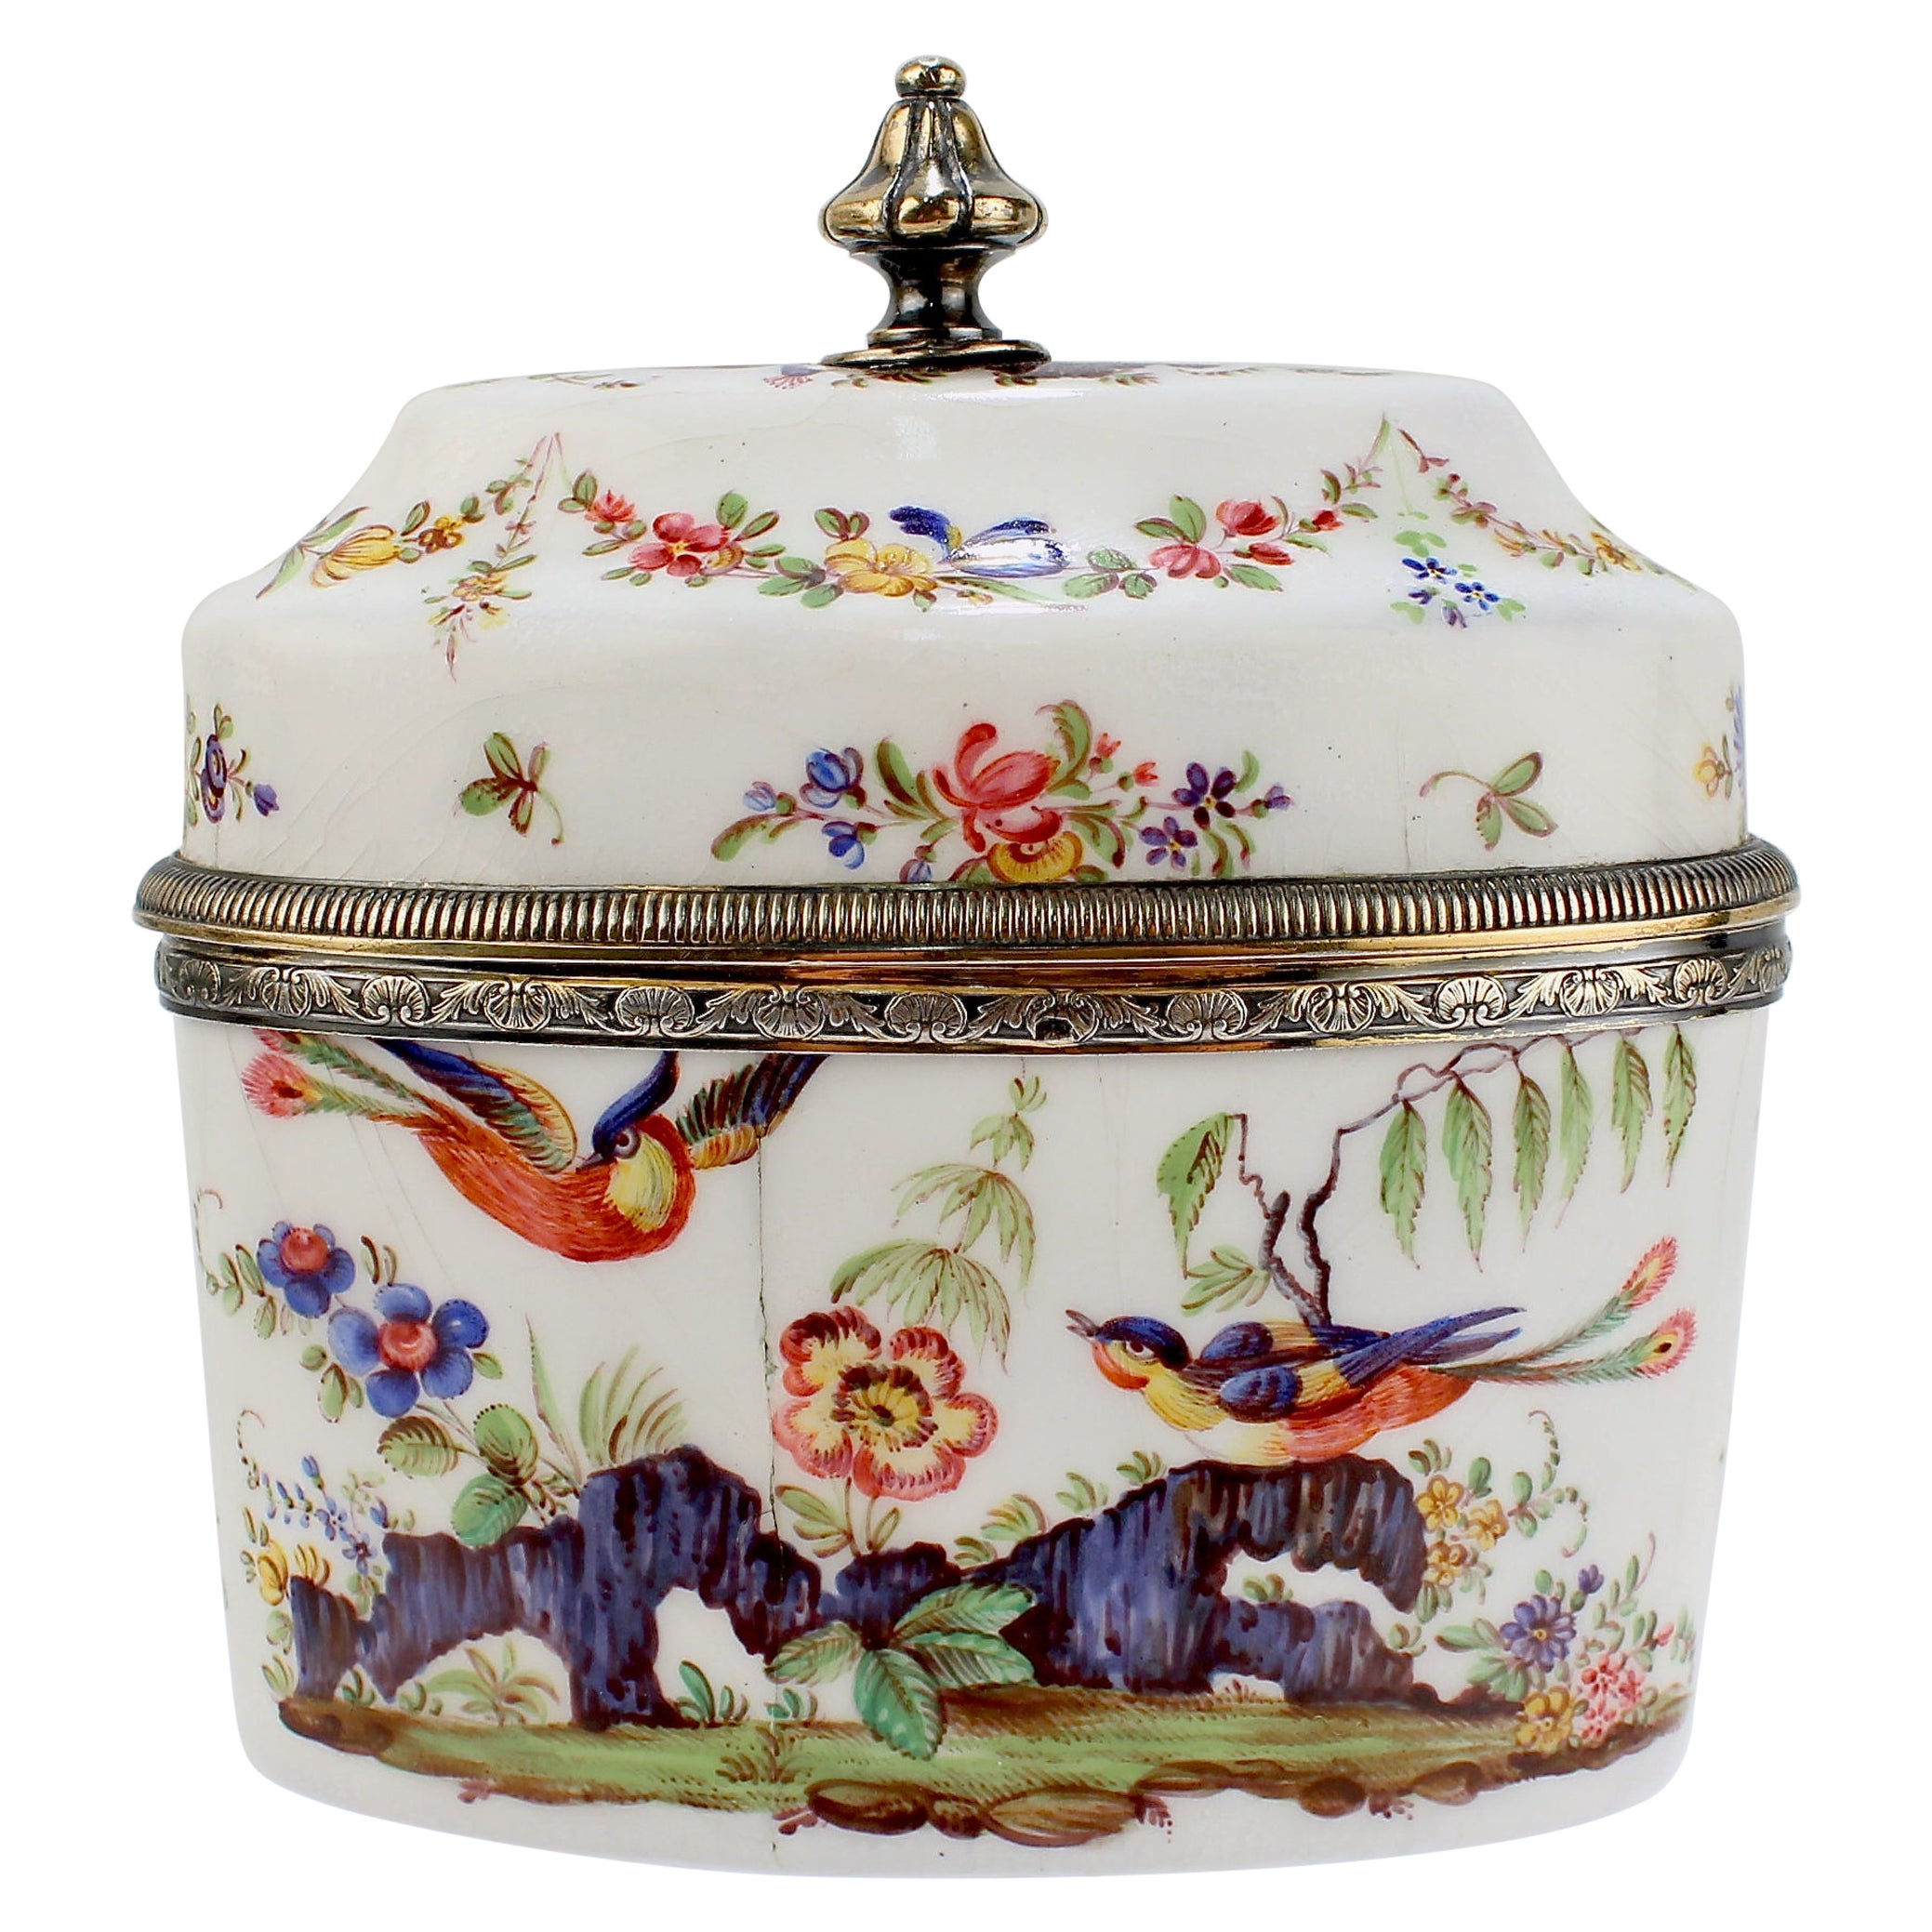 Antique 19th Century French Beaux-Arts Silver-Mounted Enamel Tea Caddy by Risler For Sale